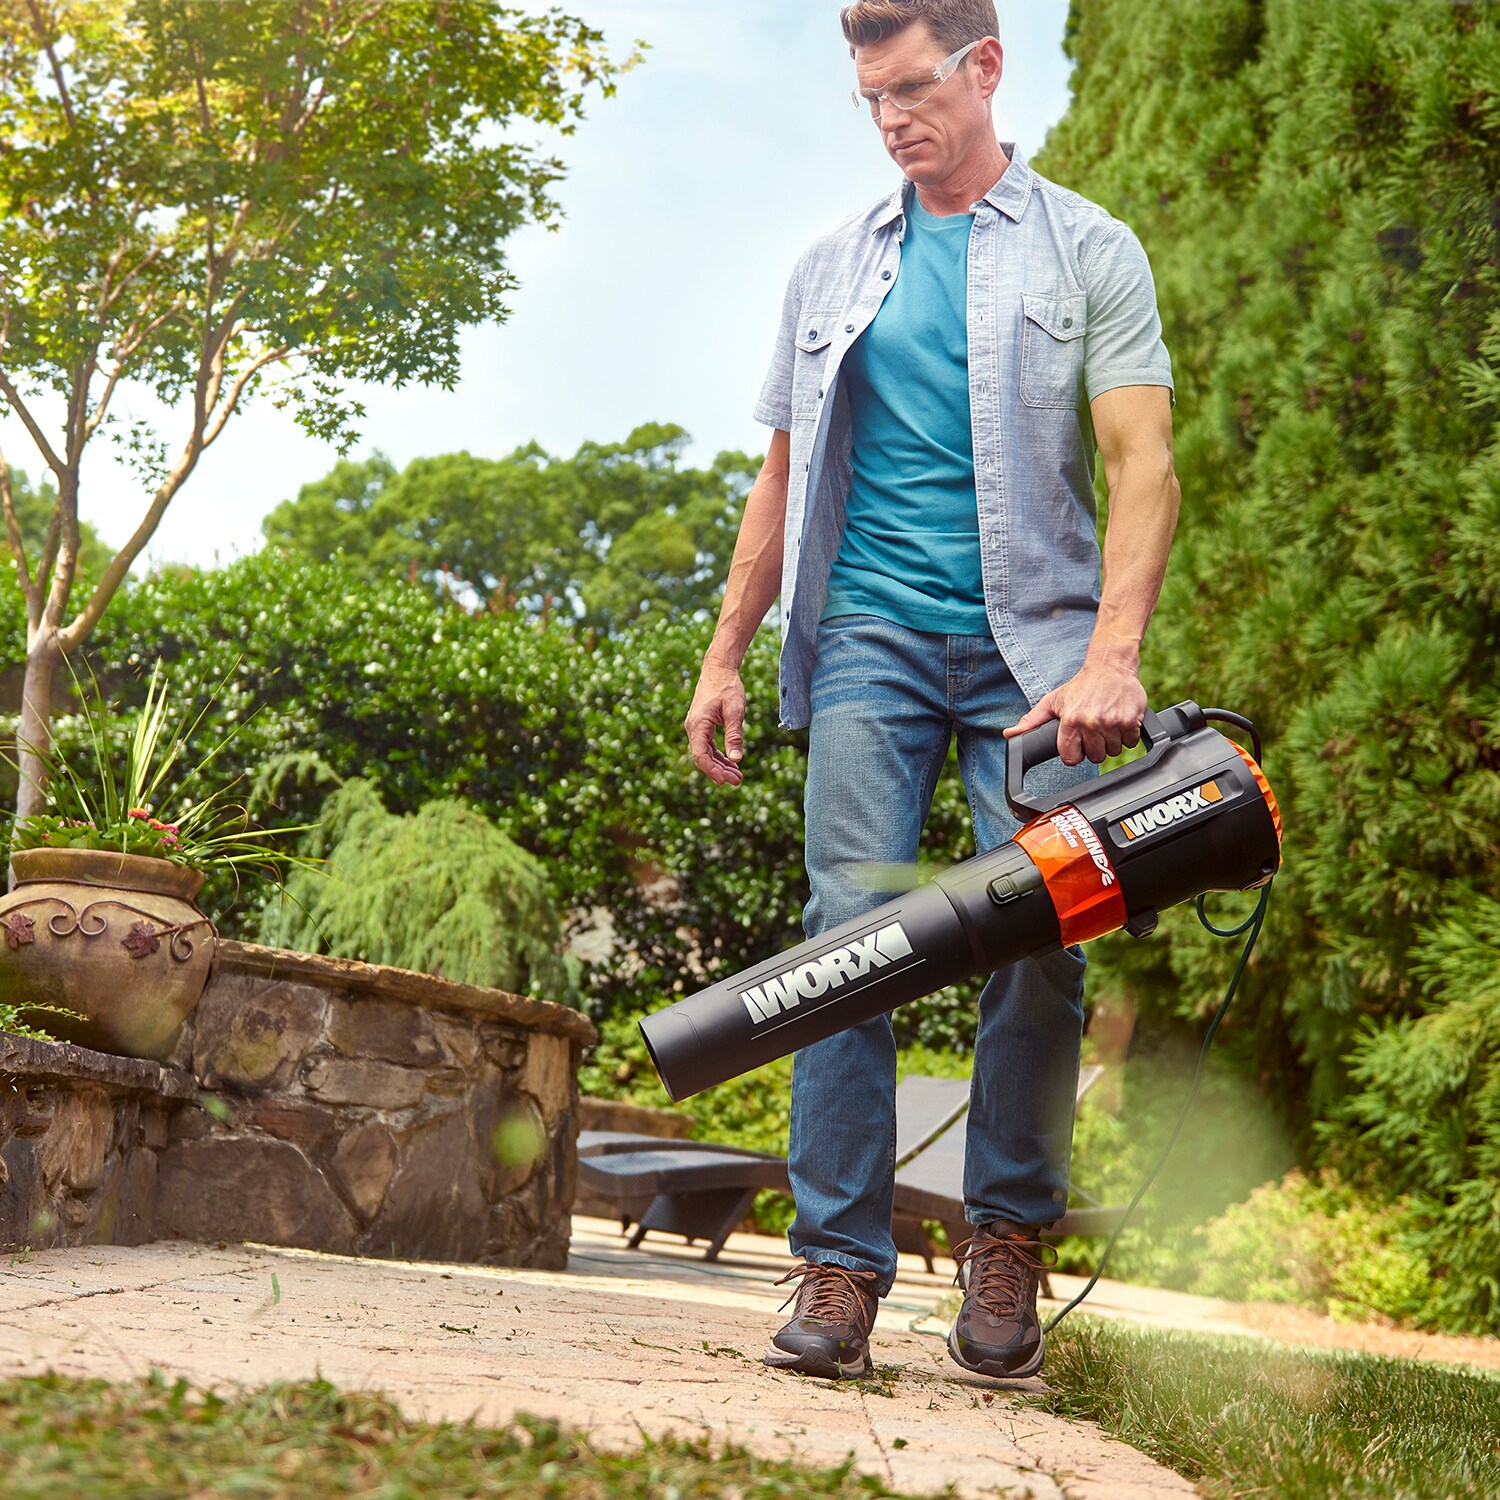 Image of Worx corded leaf blower with cord plugged in